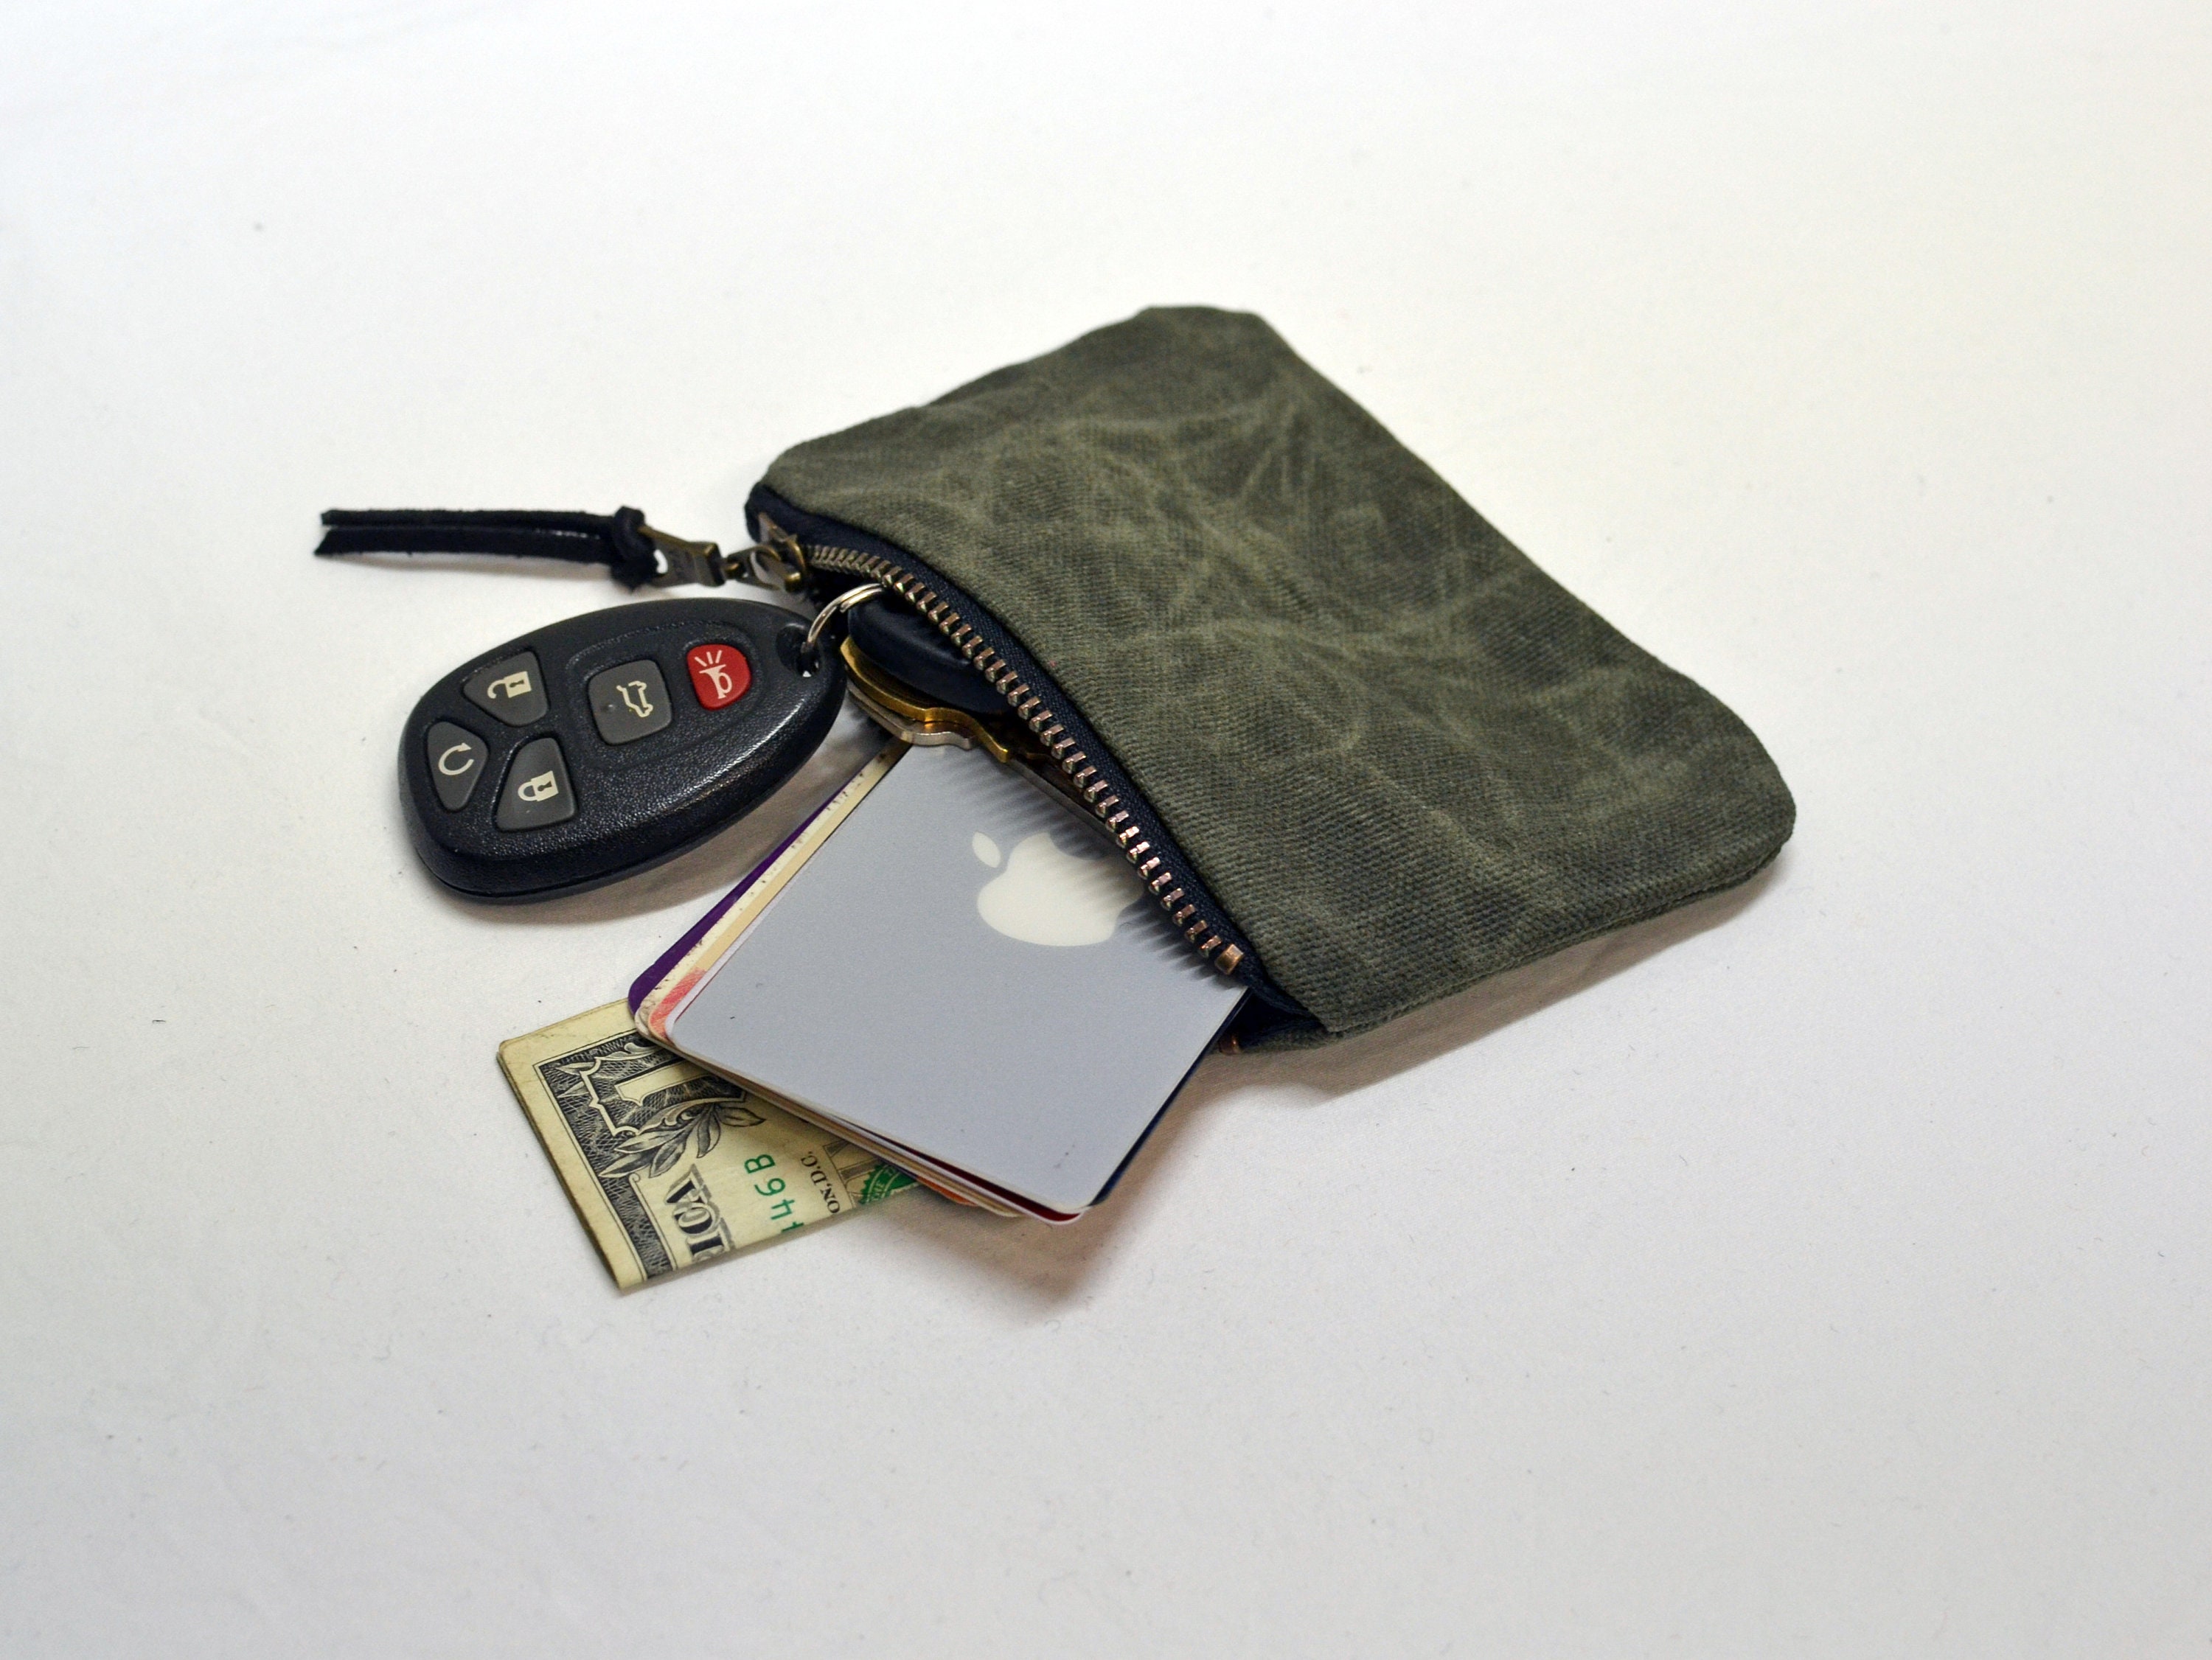 How To Make A Diy Key Pouch From a Coin Purse - AppleGreen Cottage